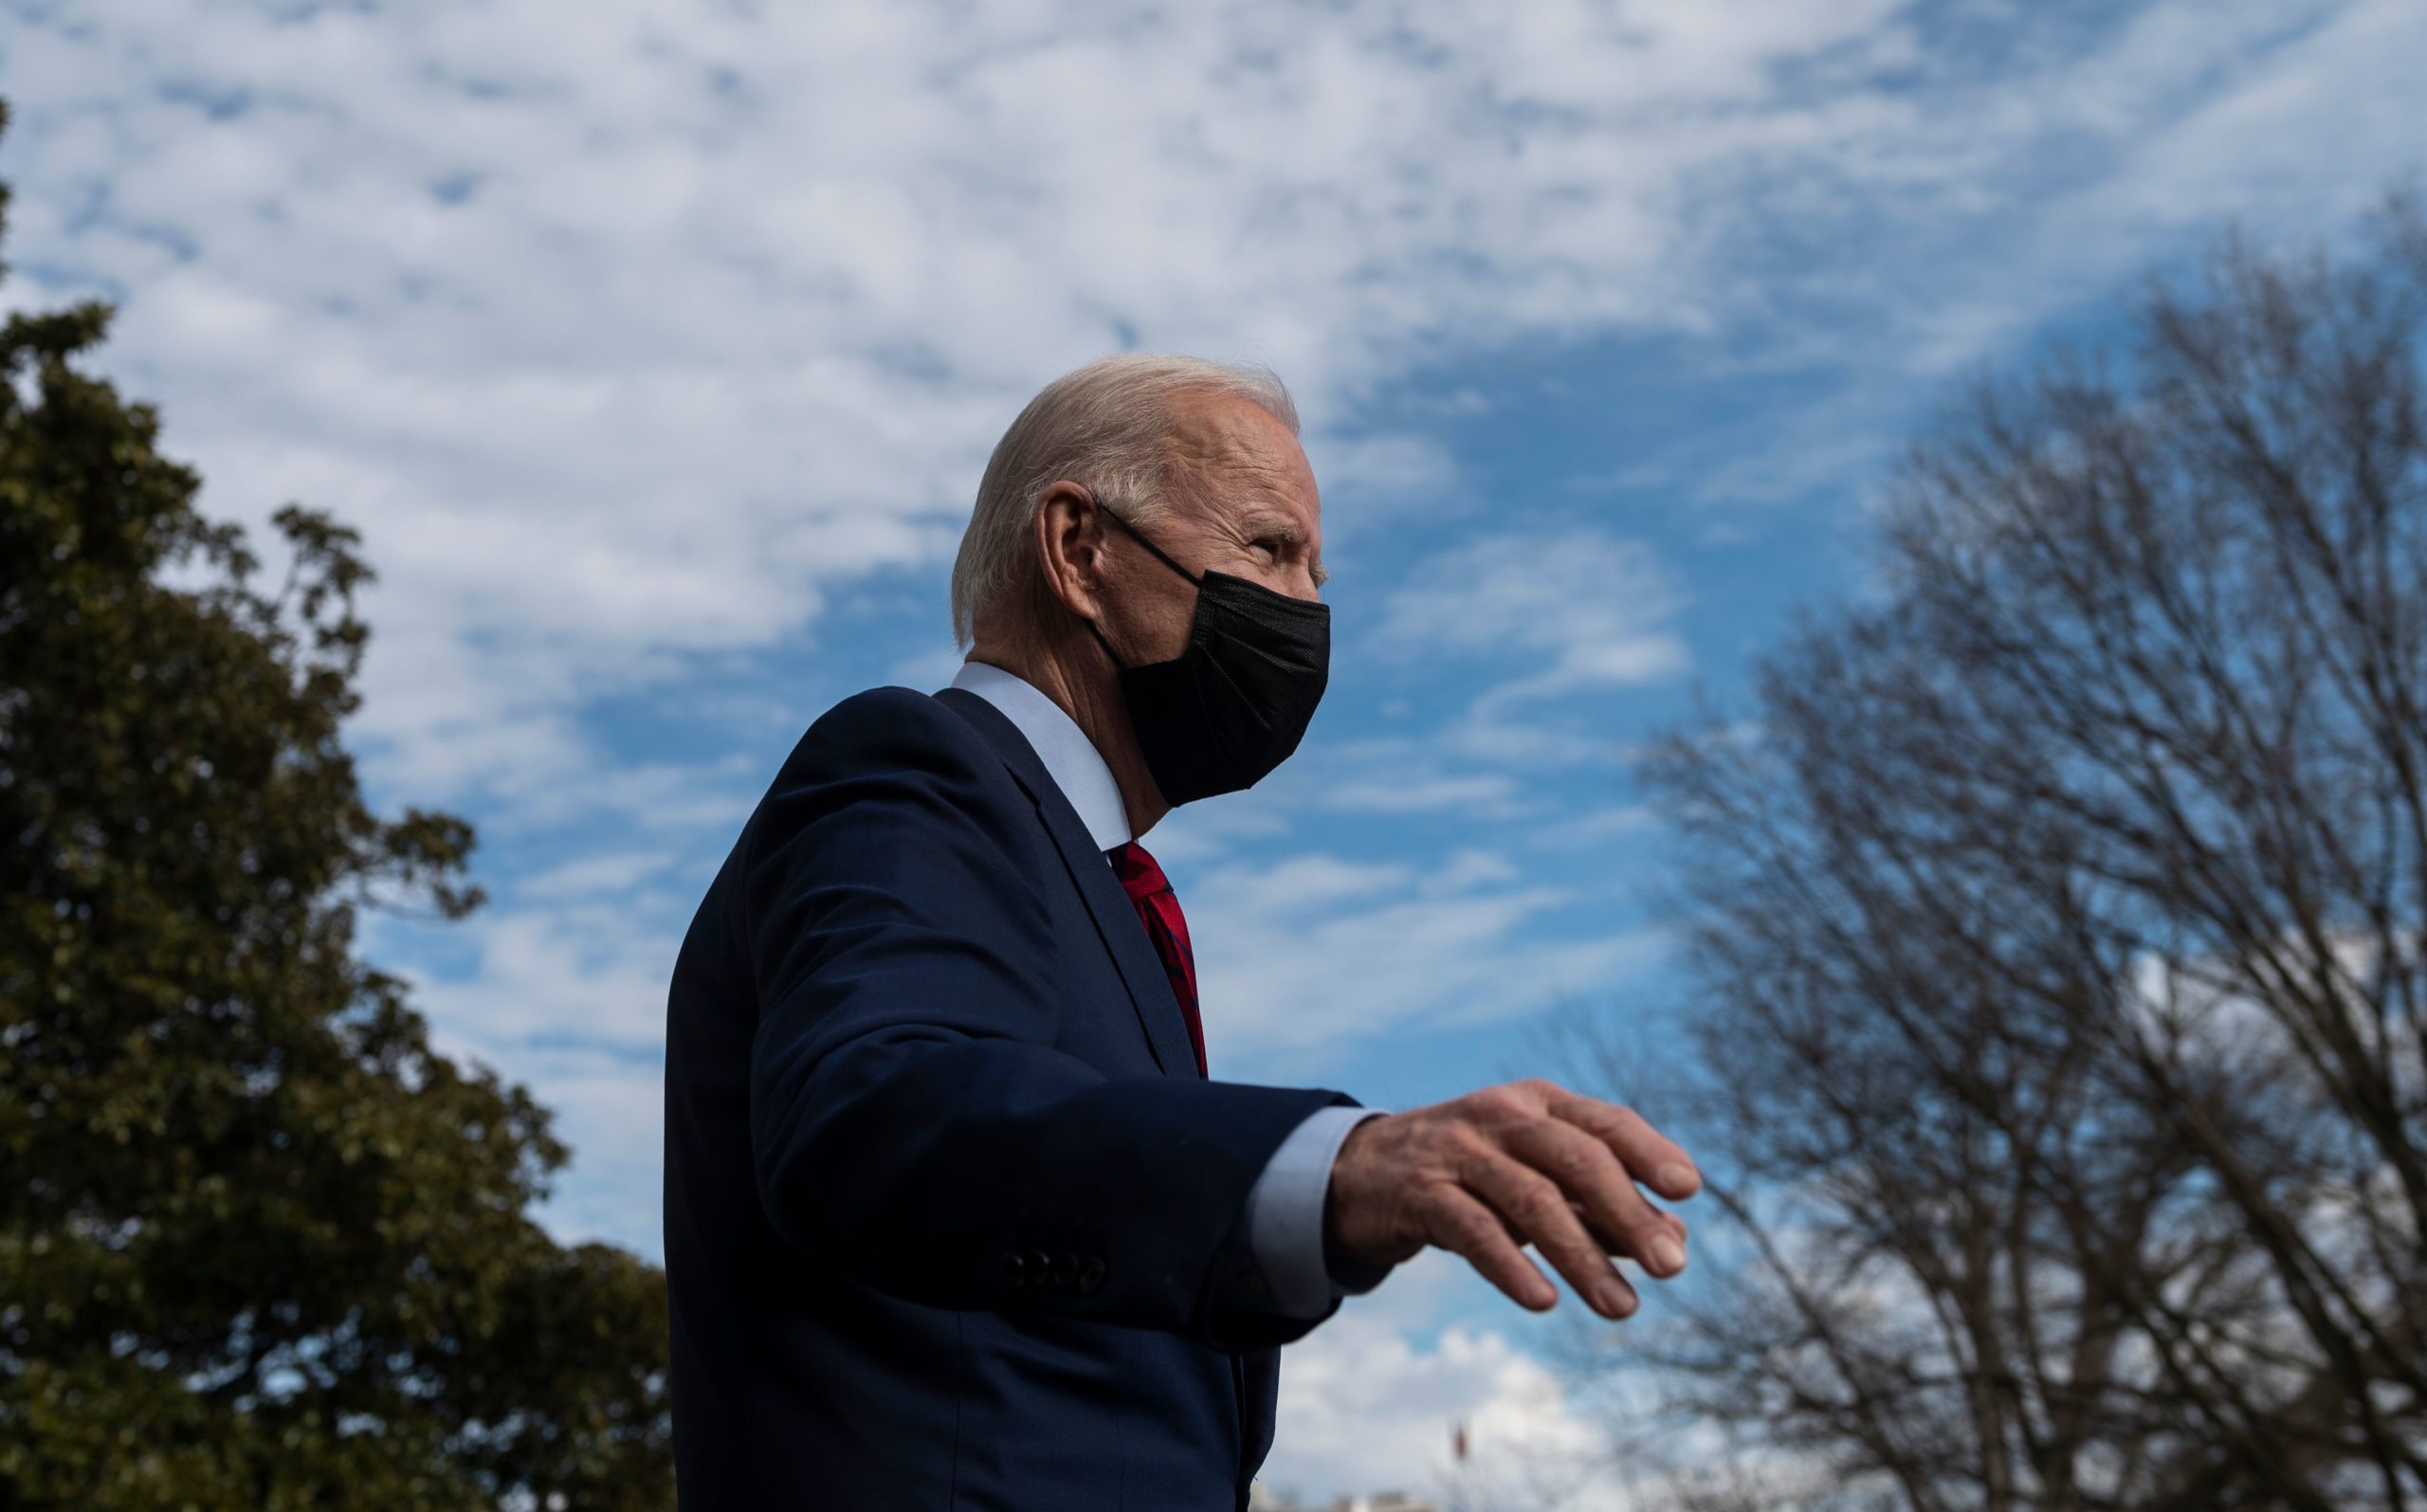 US President Joe Biden departs for Wilmington, Delaware, from the South Lawn of the White House in Washington, DC, on February 27, 2021. (Photo by ANDREW CABALLERO-REYNOLDS/AFP via Getty Images)